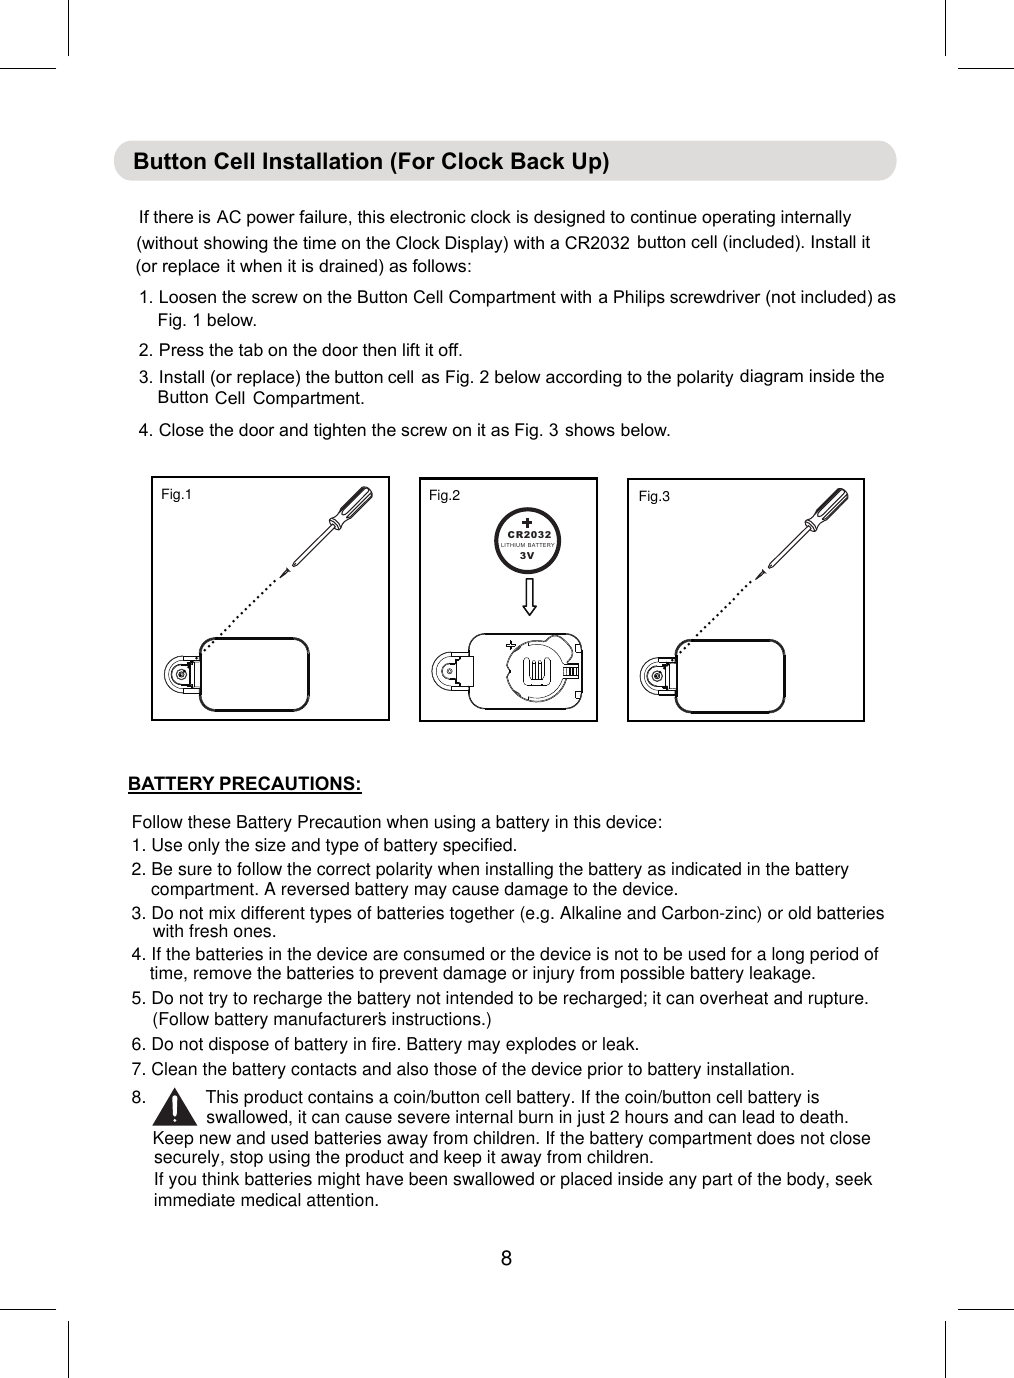 Follow these Battery Precaution when using a battery in this device:1. Use only the size and type of battery specified.6. Do not dispose of battery in fire. Battery may explodes or leak.7. Clean the battery contacts and also those of the device prior to battery installation.BATTERY PRECAUTIONS:2. Be sure to follow the correct polarity when installing the battery as indicated in the battery compartment. A reversed battery may cause damage to the device.3. Do not mix different types of batteries together (e.g. Alkaline and Carbon-zinc) or old batteries with fresh ones.4. If the batteries in the device are consumed or the device is not to be used for a long period of time, remove the batteries to prevent damage or injury from possible battery leakage.5. Do not try to recharge the battery not intended to be recharged; it can overheat and rupture. (Follow battery manufacturer’s instructions.)8.            This product contains a coin/button cell battery. If the coin/button cell battery is swallowed, it can cause severe internal burn in just 2 hours and can lead to death.Keep new and used batteries away from children. If the battery compartment does not closesecurely, stop using the product and keep it away from children.If you think batteries might have been swallowed or placed inside any part of the body, seek immediate medical attention.CR2032LITHIU M BATTERY3V................................................Fig.1   Fig.2 Fig.3 8Button Cell Installation (For Clock Back Up)If th AC power failure, this electronic clock is designed to continue operating internally(without showing the time on the Clock Display) with a CR2032 button cell (included). Install it(or replace it when it is drained) as follows:1.Loosenthe screw on the Button Cell Compartment witha Philipsscrewdriver (not included) asFig. 1 below.2.Press the tab on the door then lift it off.3.Install (or replace) thasFig. 2 below according to the polaritydiagram inside theButton Cell Compartment.4.Closethe door and tighten the screw on it as Fig. 3below.ere isebuttoncellshows